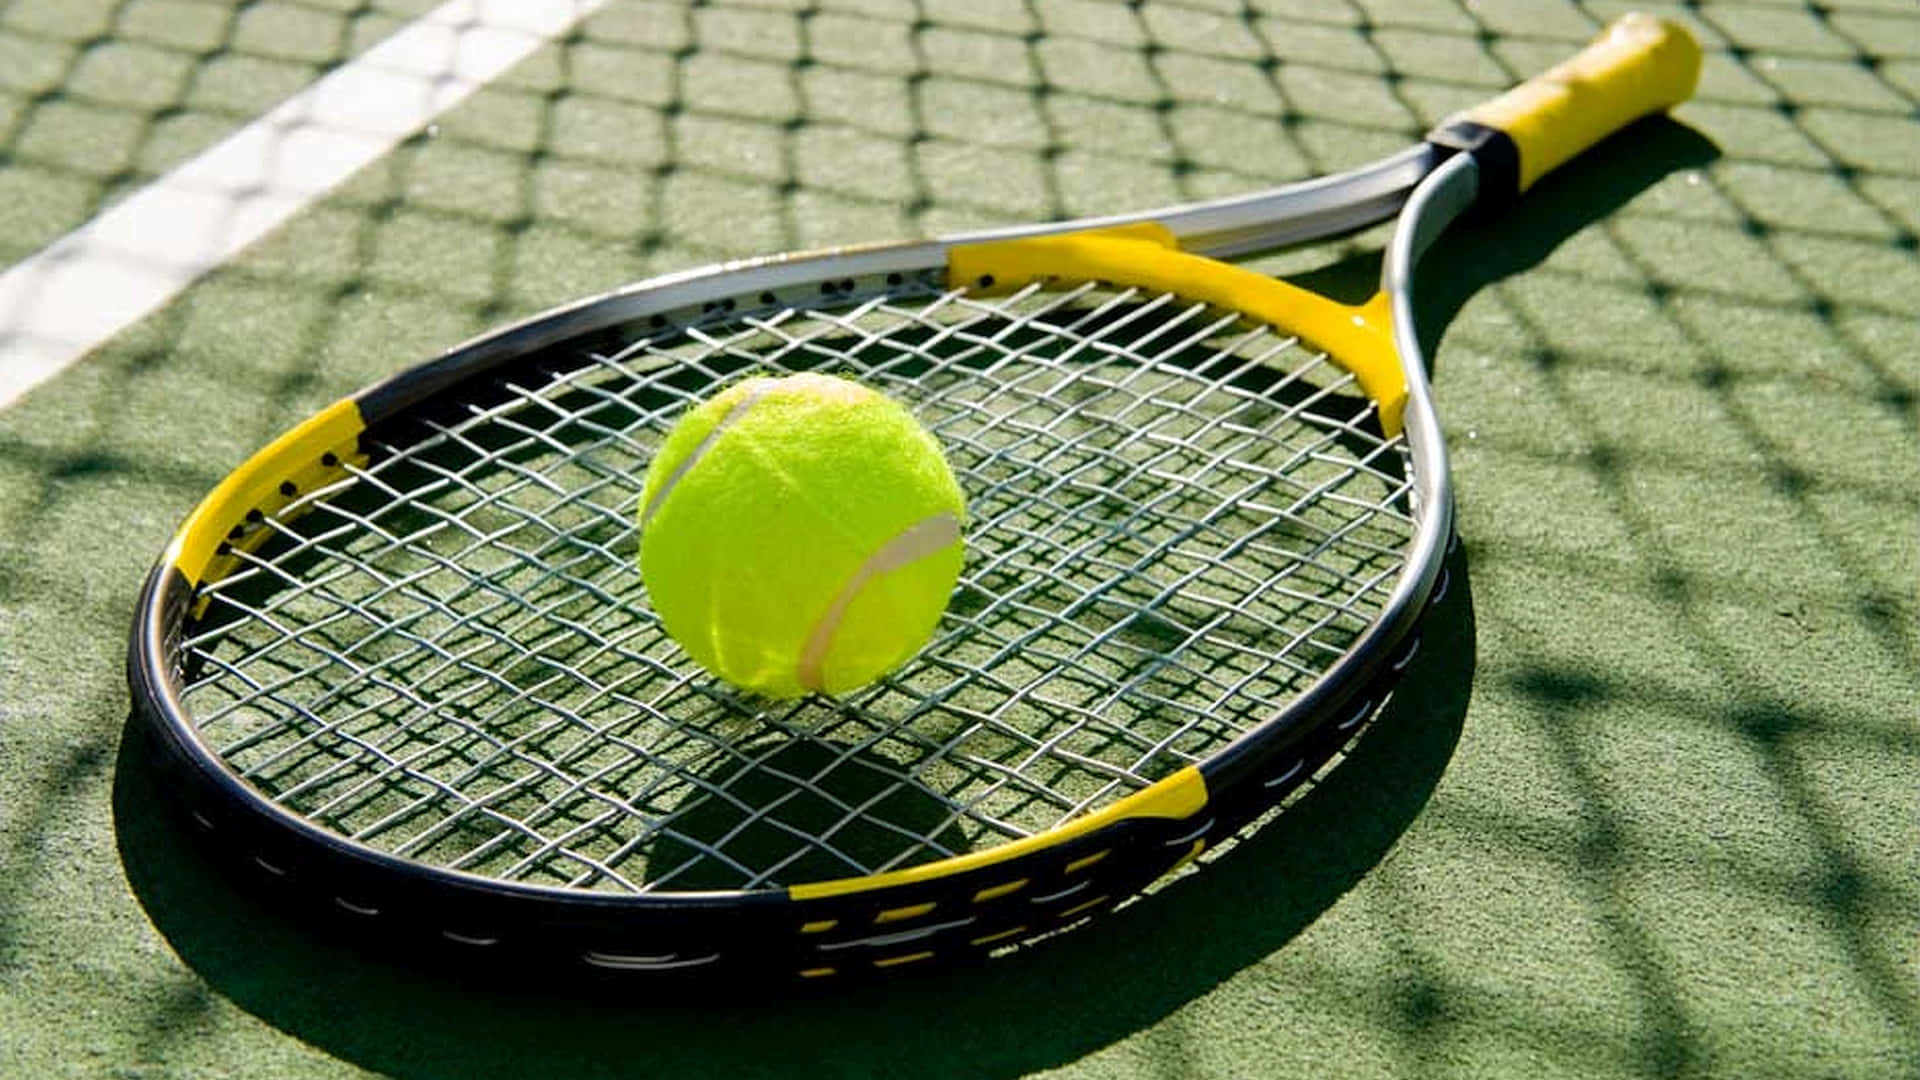 HD Tennis Racket And Ball On Court Background